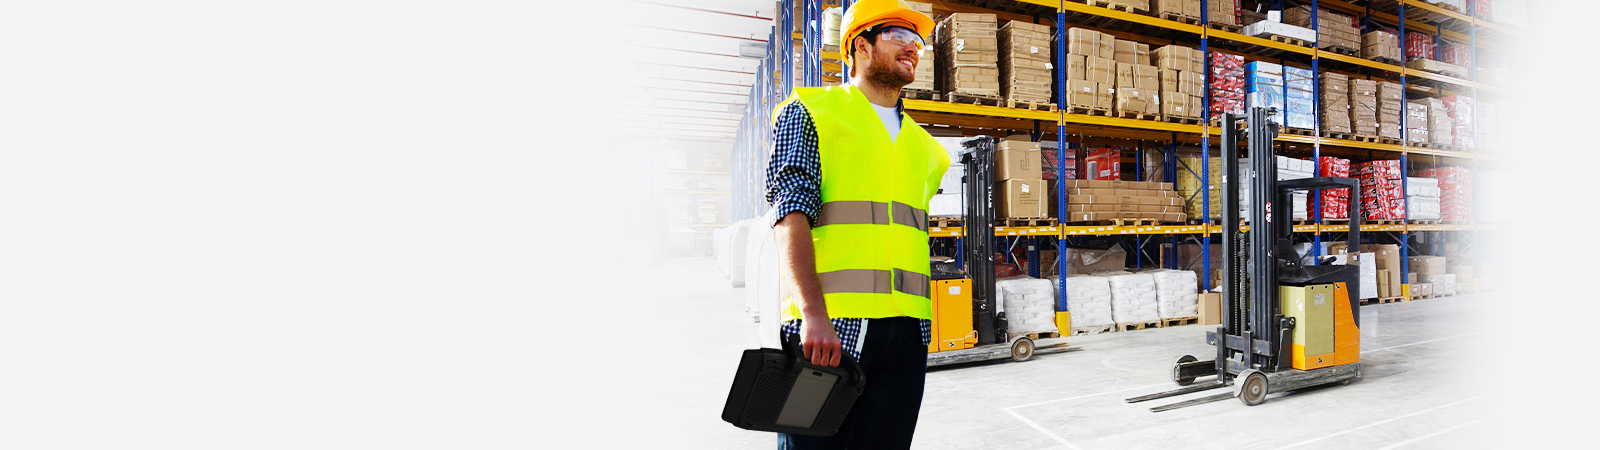 Tablet applications in logistics and warehousing solutions